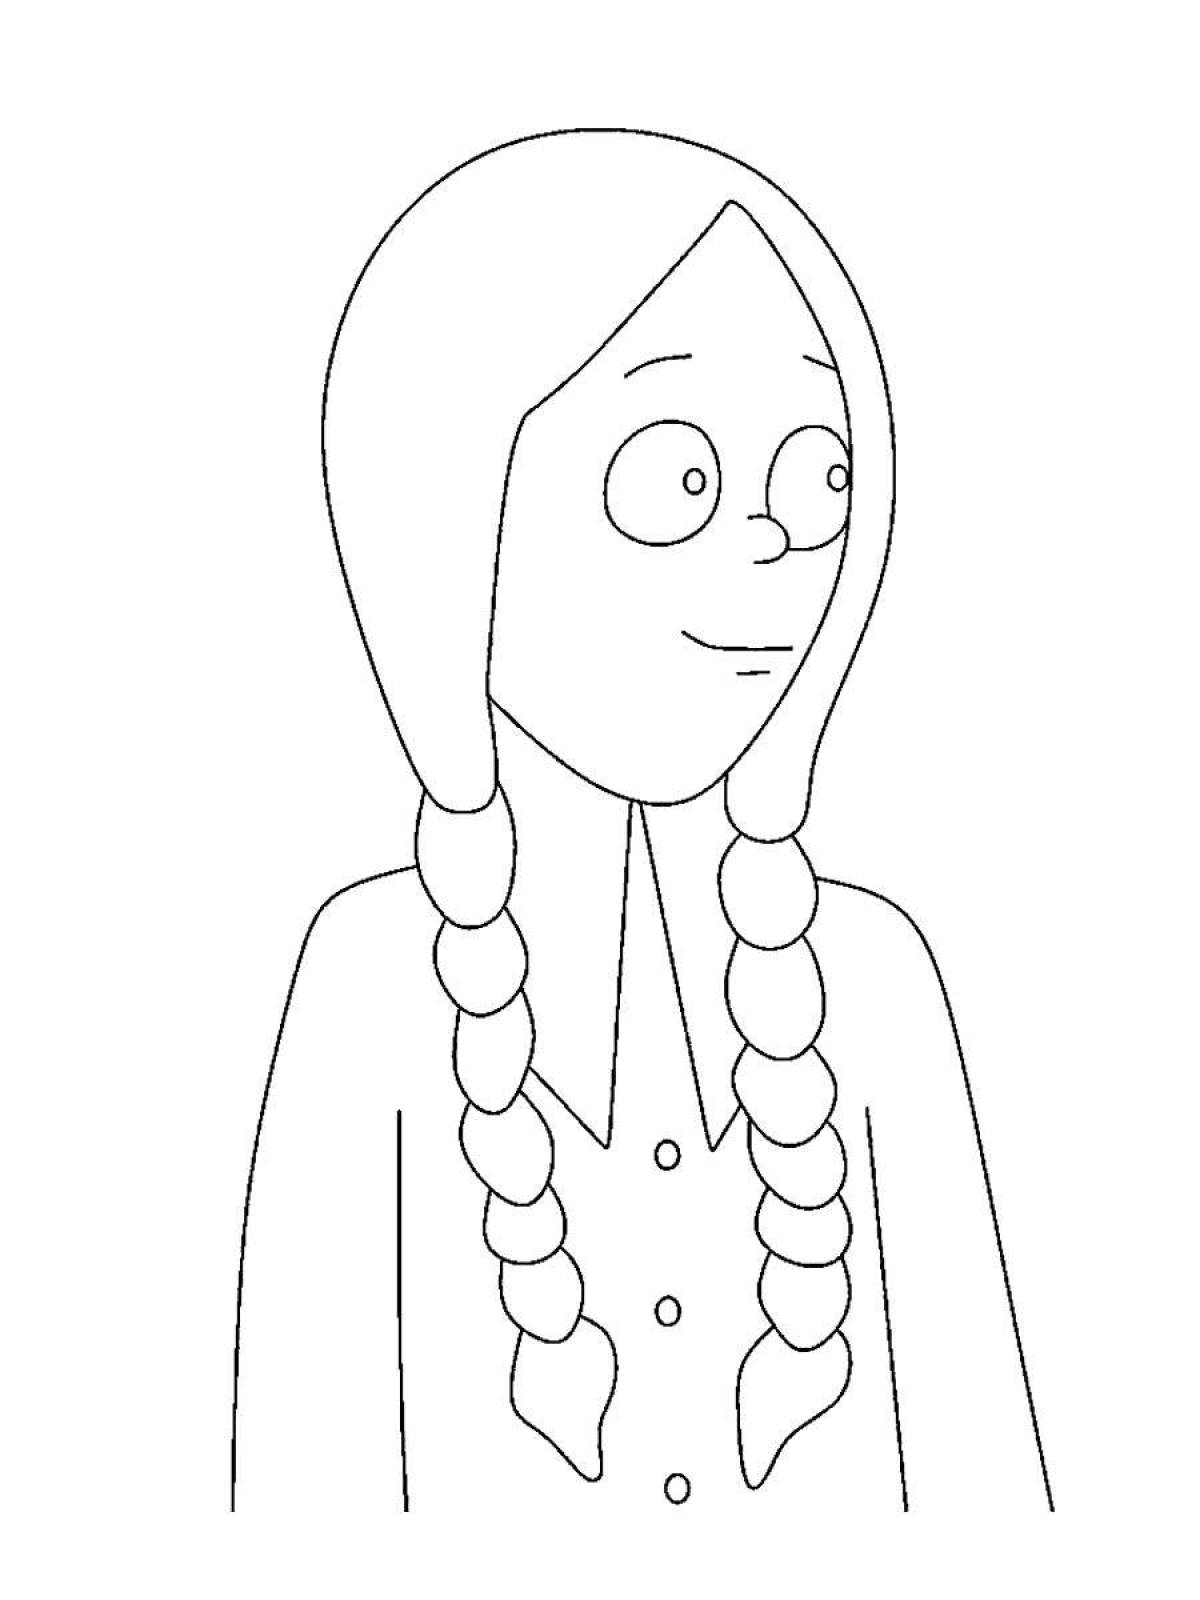 Coloring page happy wednesday 2022